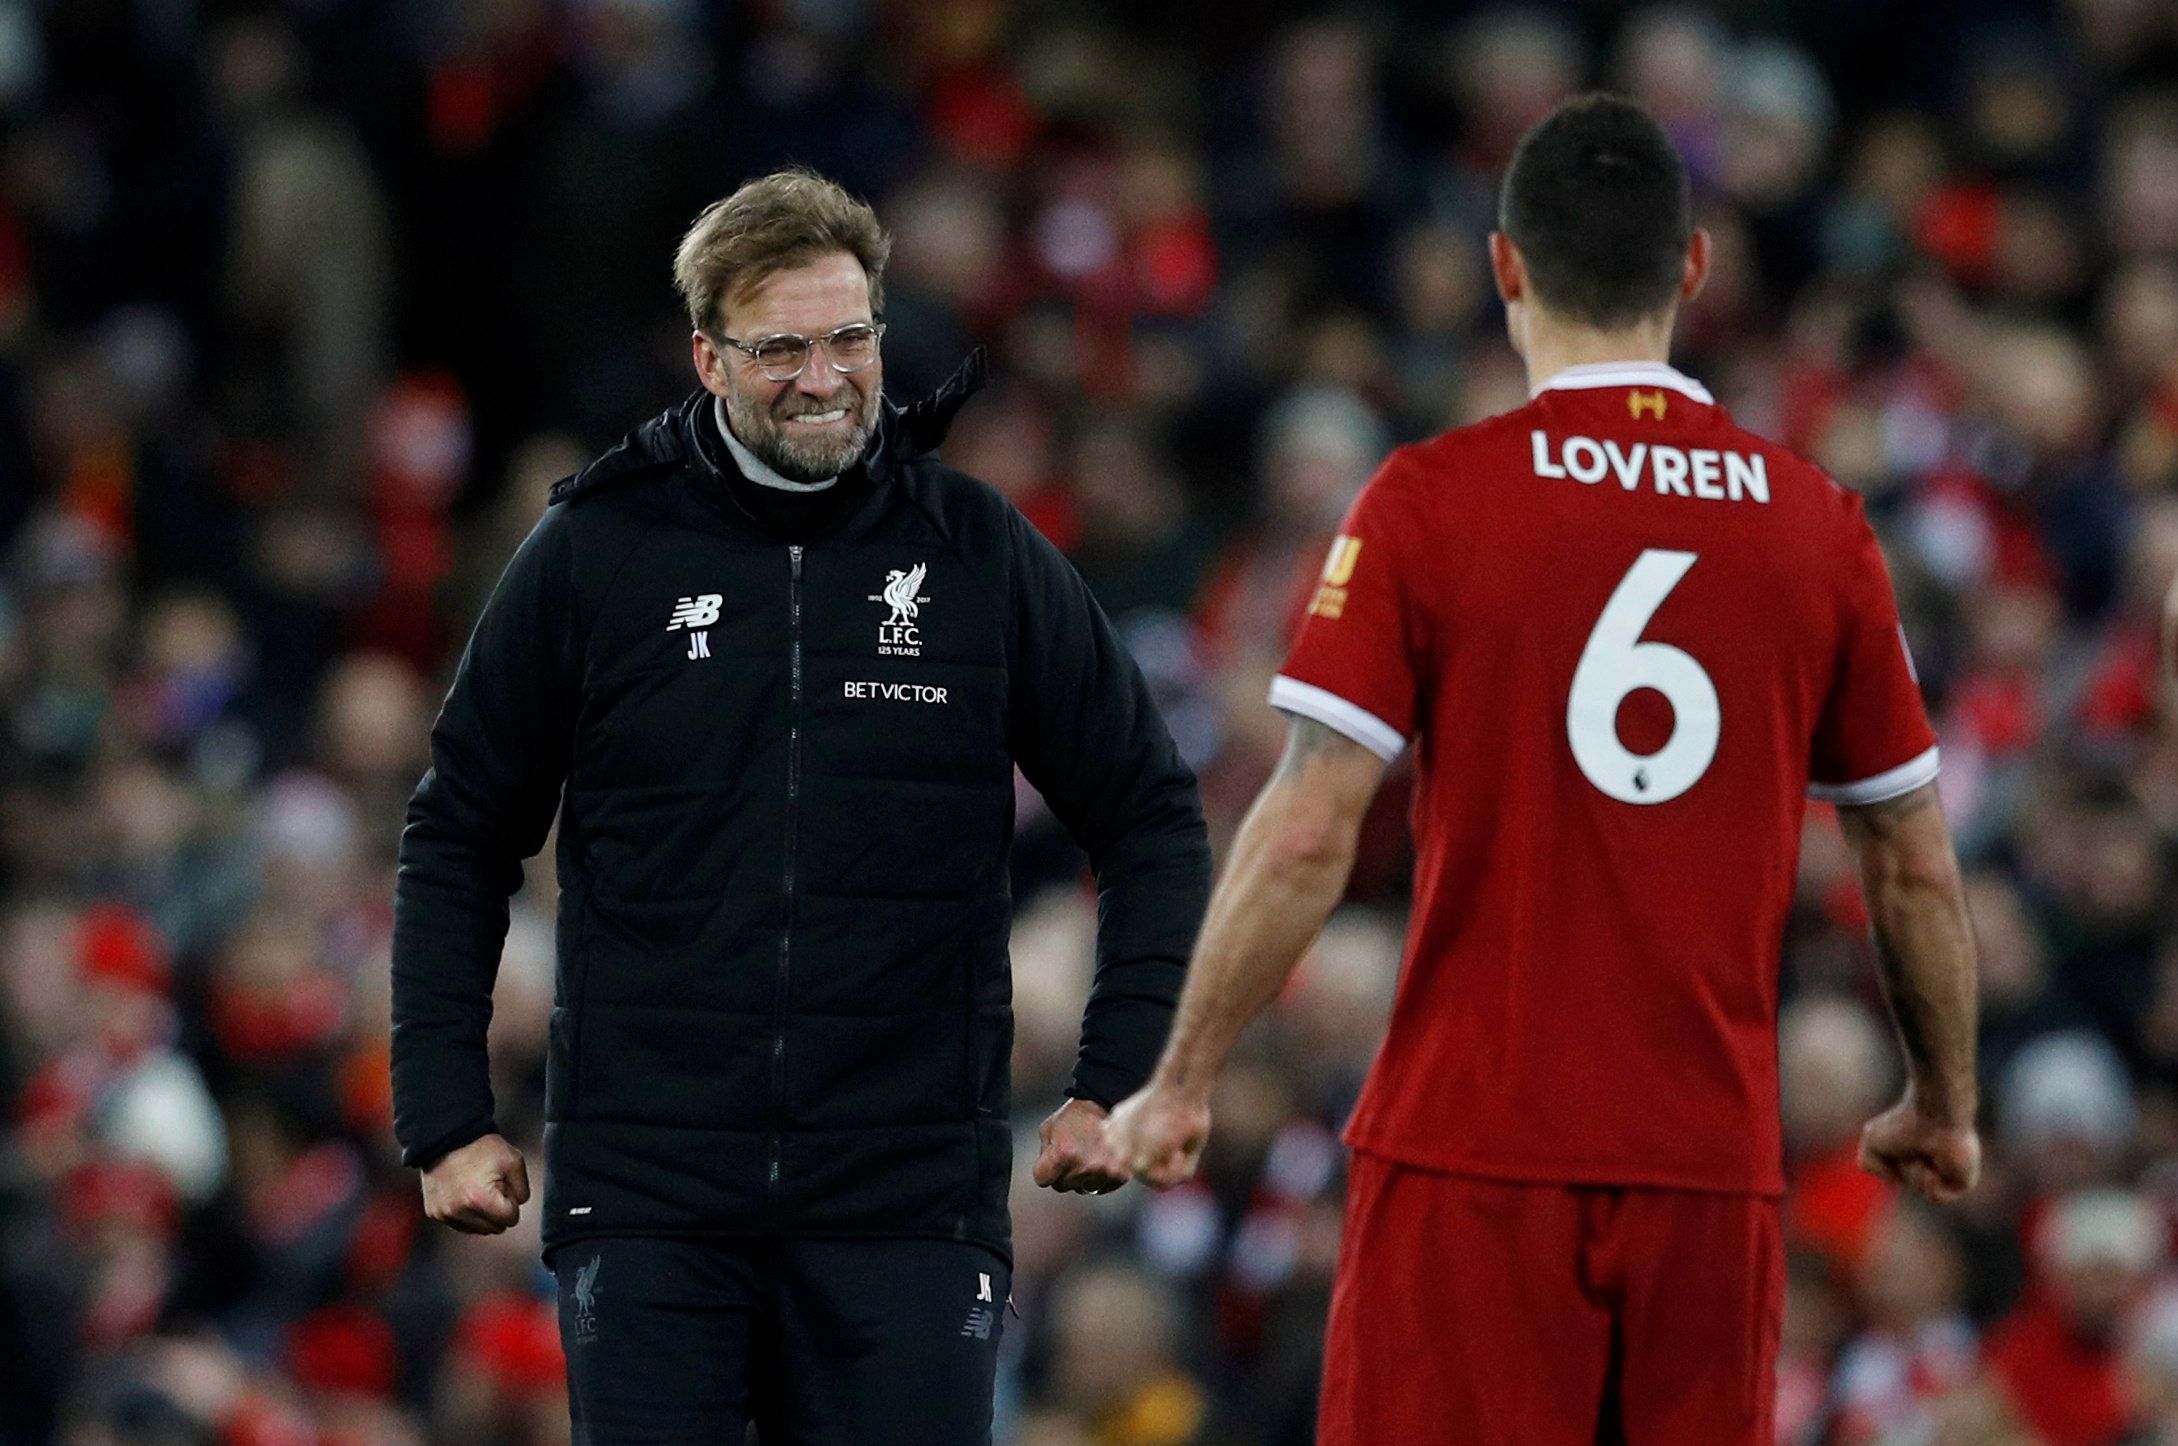 Soccer Football - Premier League - Liverpool vs Leicester City - Anfield, Liverpool, Britain - December 30, 2017   Liverpool manager Juergen Klopp celebrates with Dejan Lovren after the match     REUTERS/Phil Noble    EDITORIAL USE ONLY. No use with unauthorized audio, video, data, fixture lists, club/league logos or 